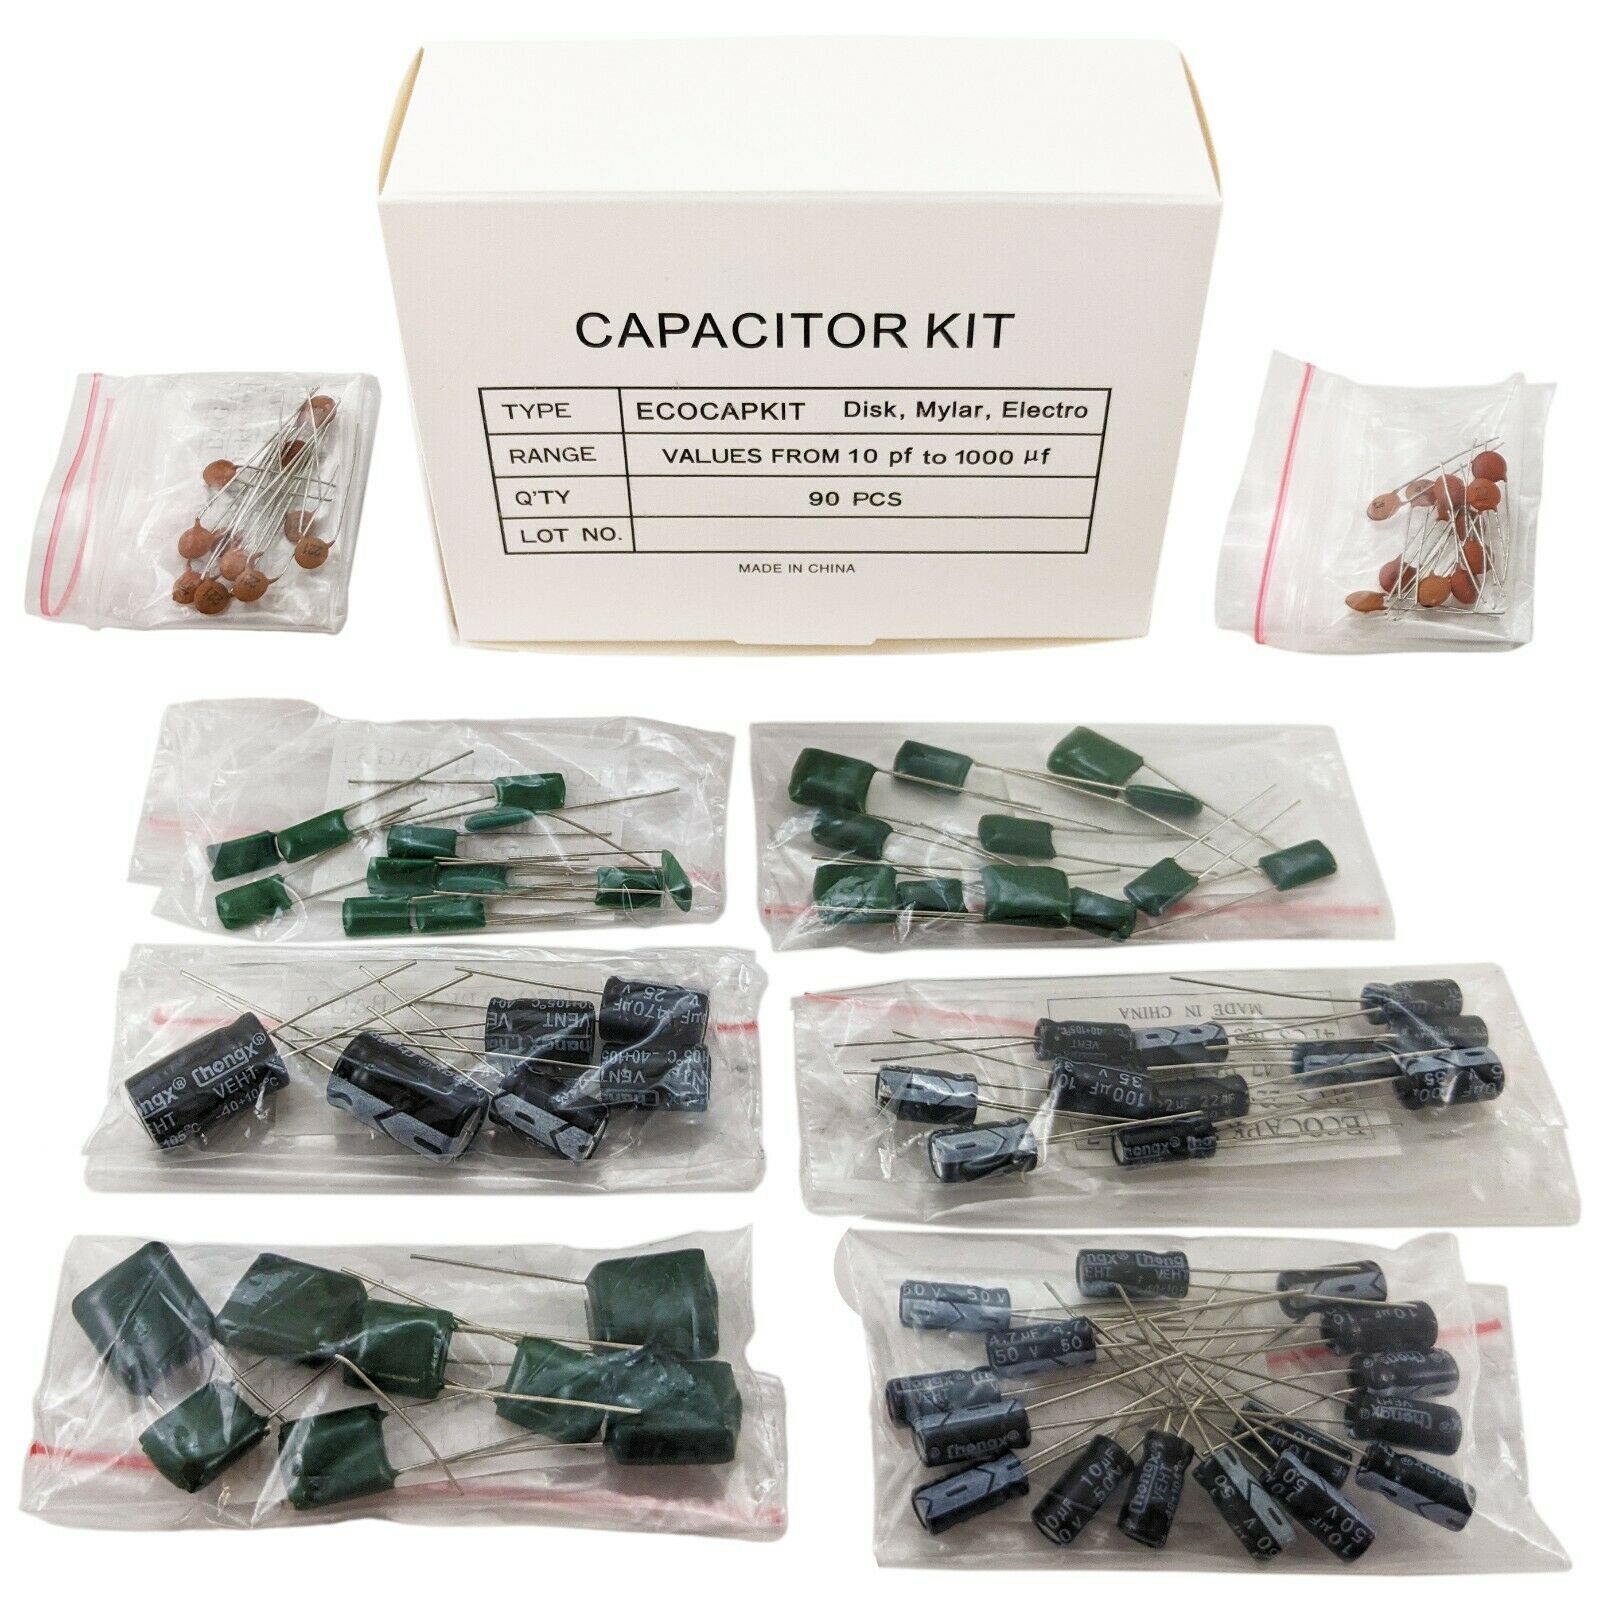 Capacitor Kit, 90 Assorted Disk, Mylar, and Electro Capacitors in Storage Box